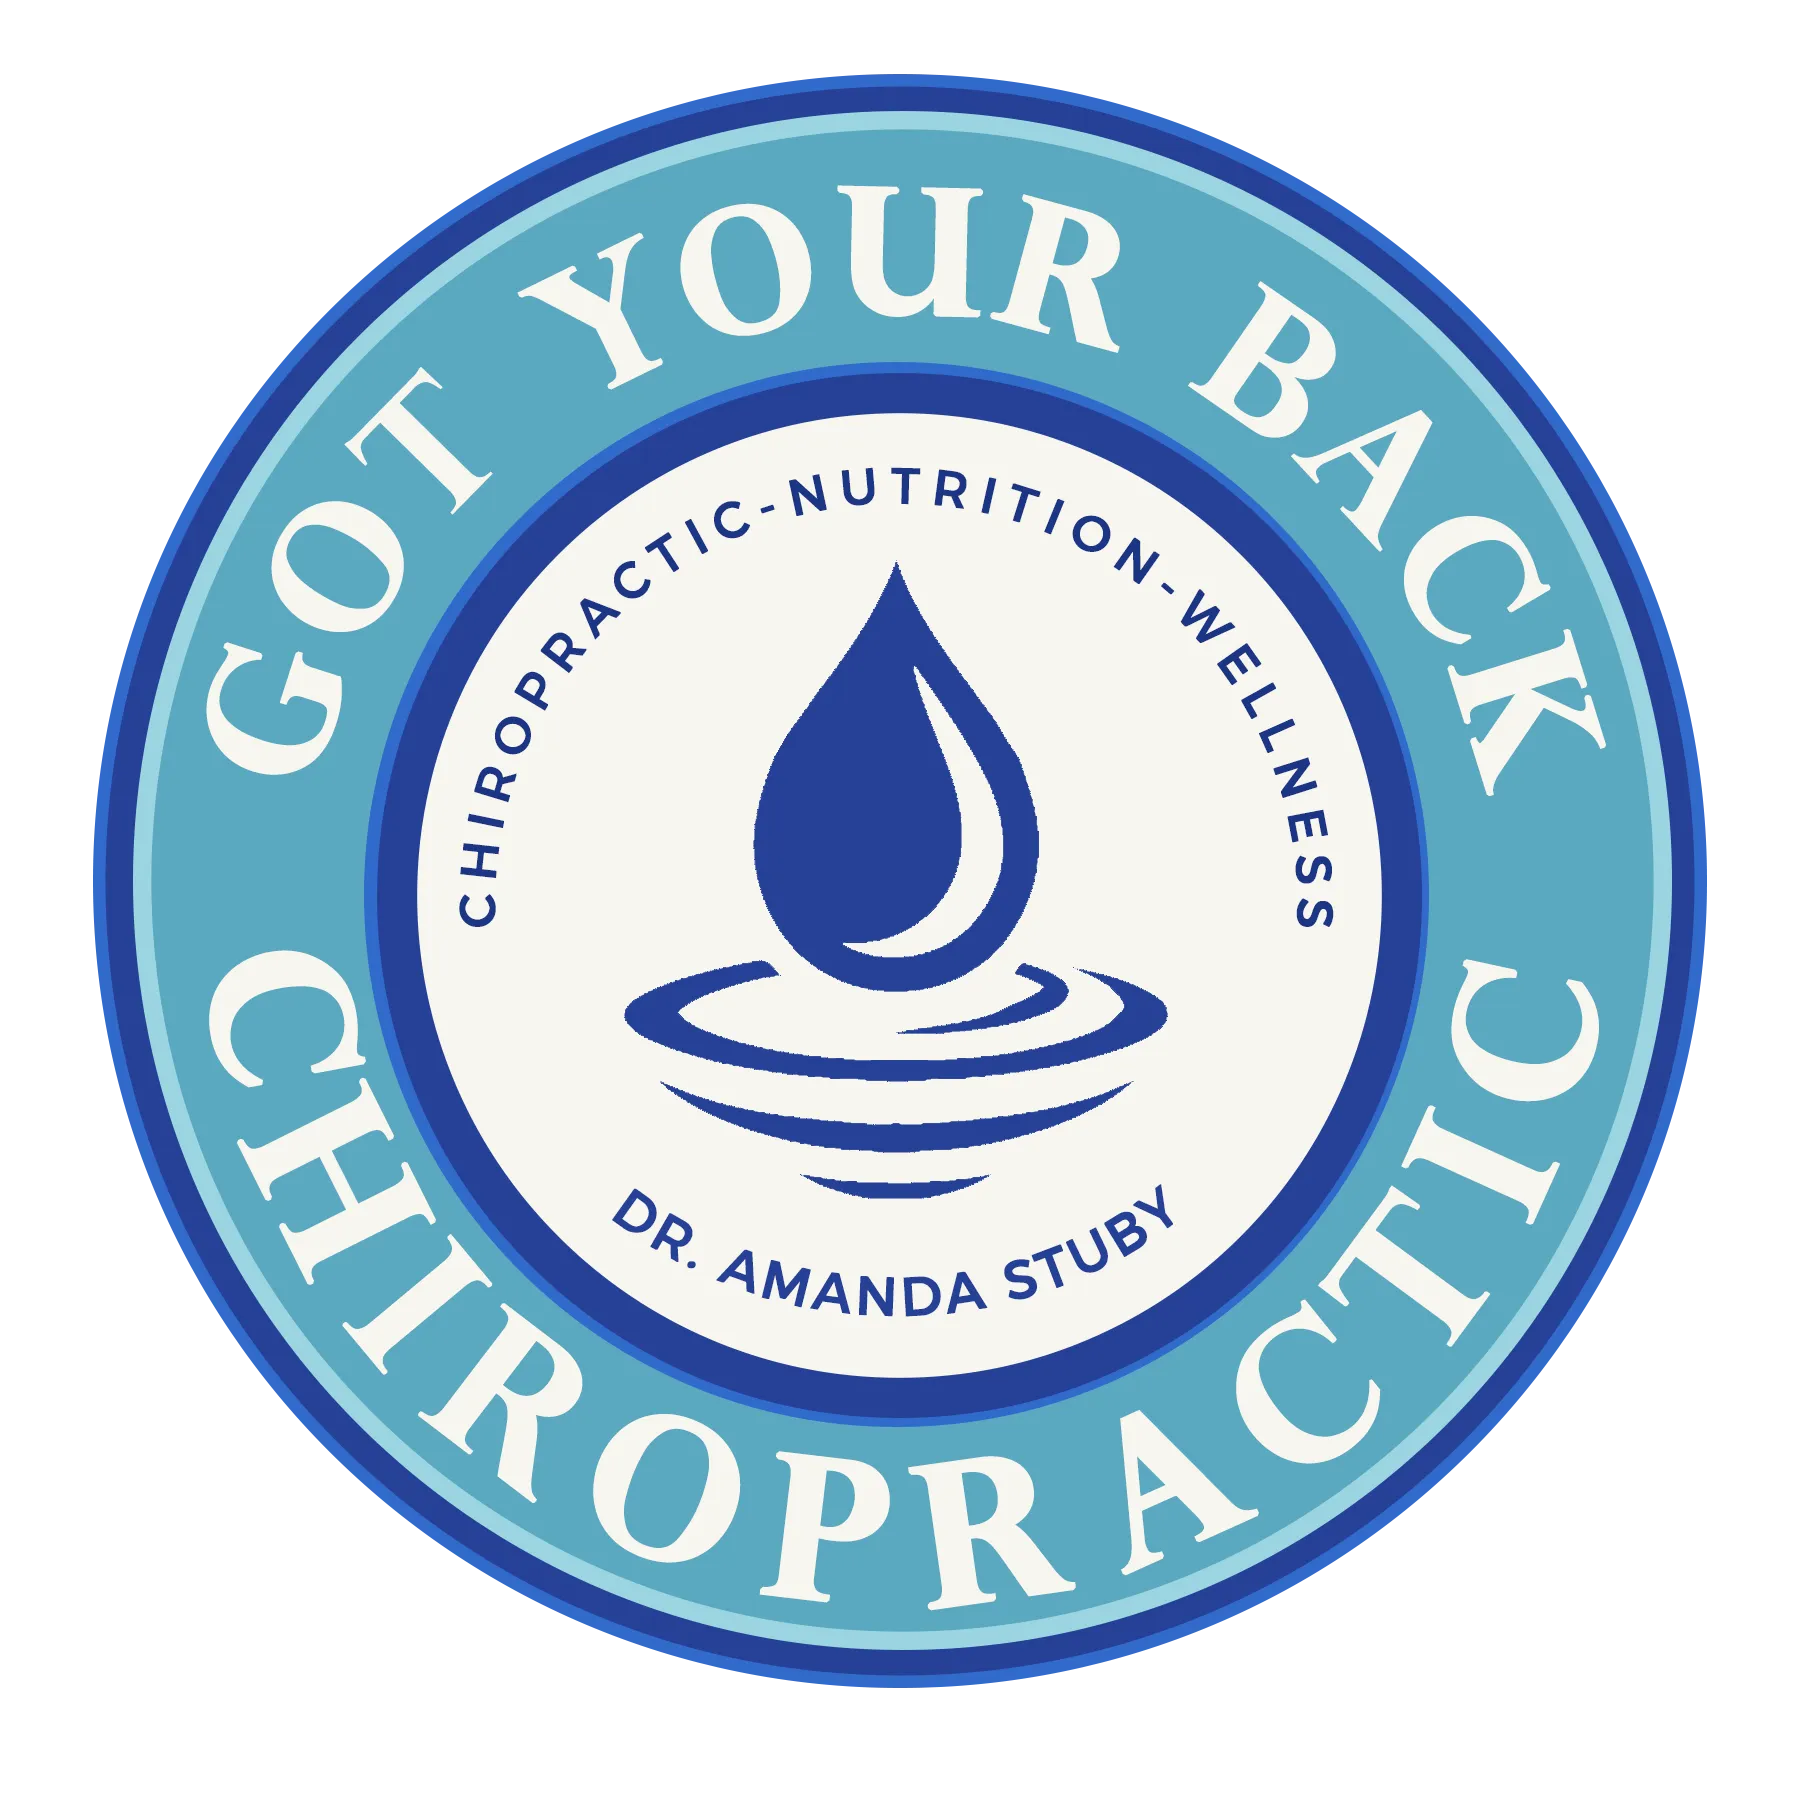 Got Your Back Chiropractic